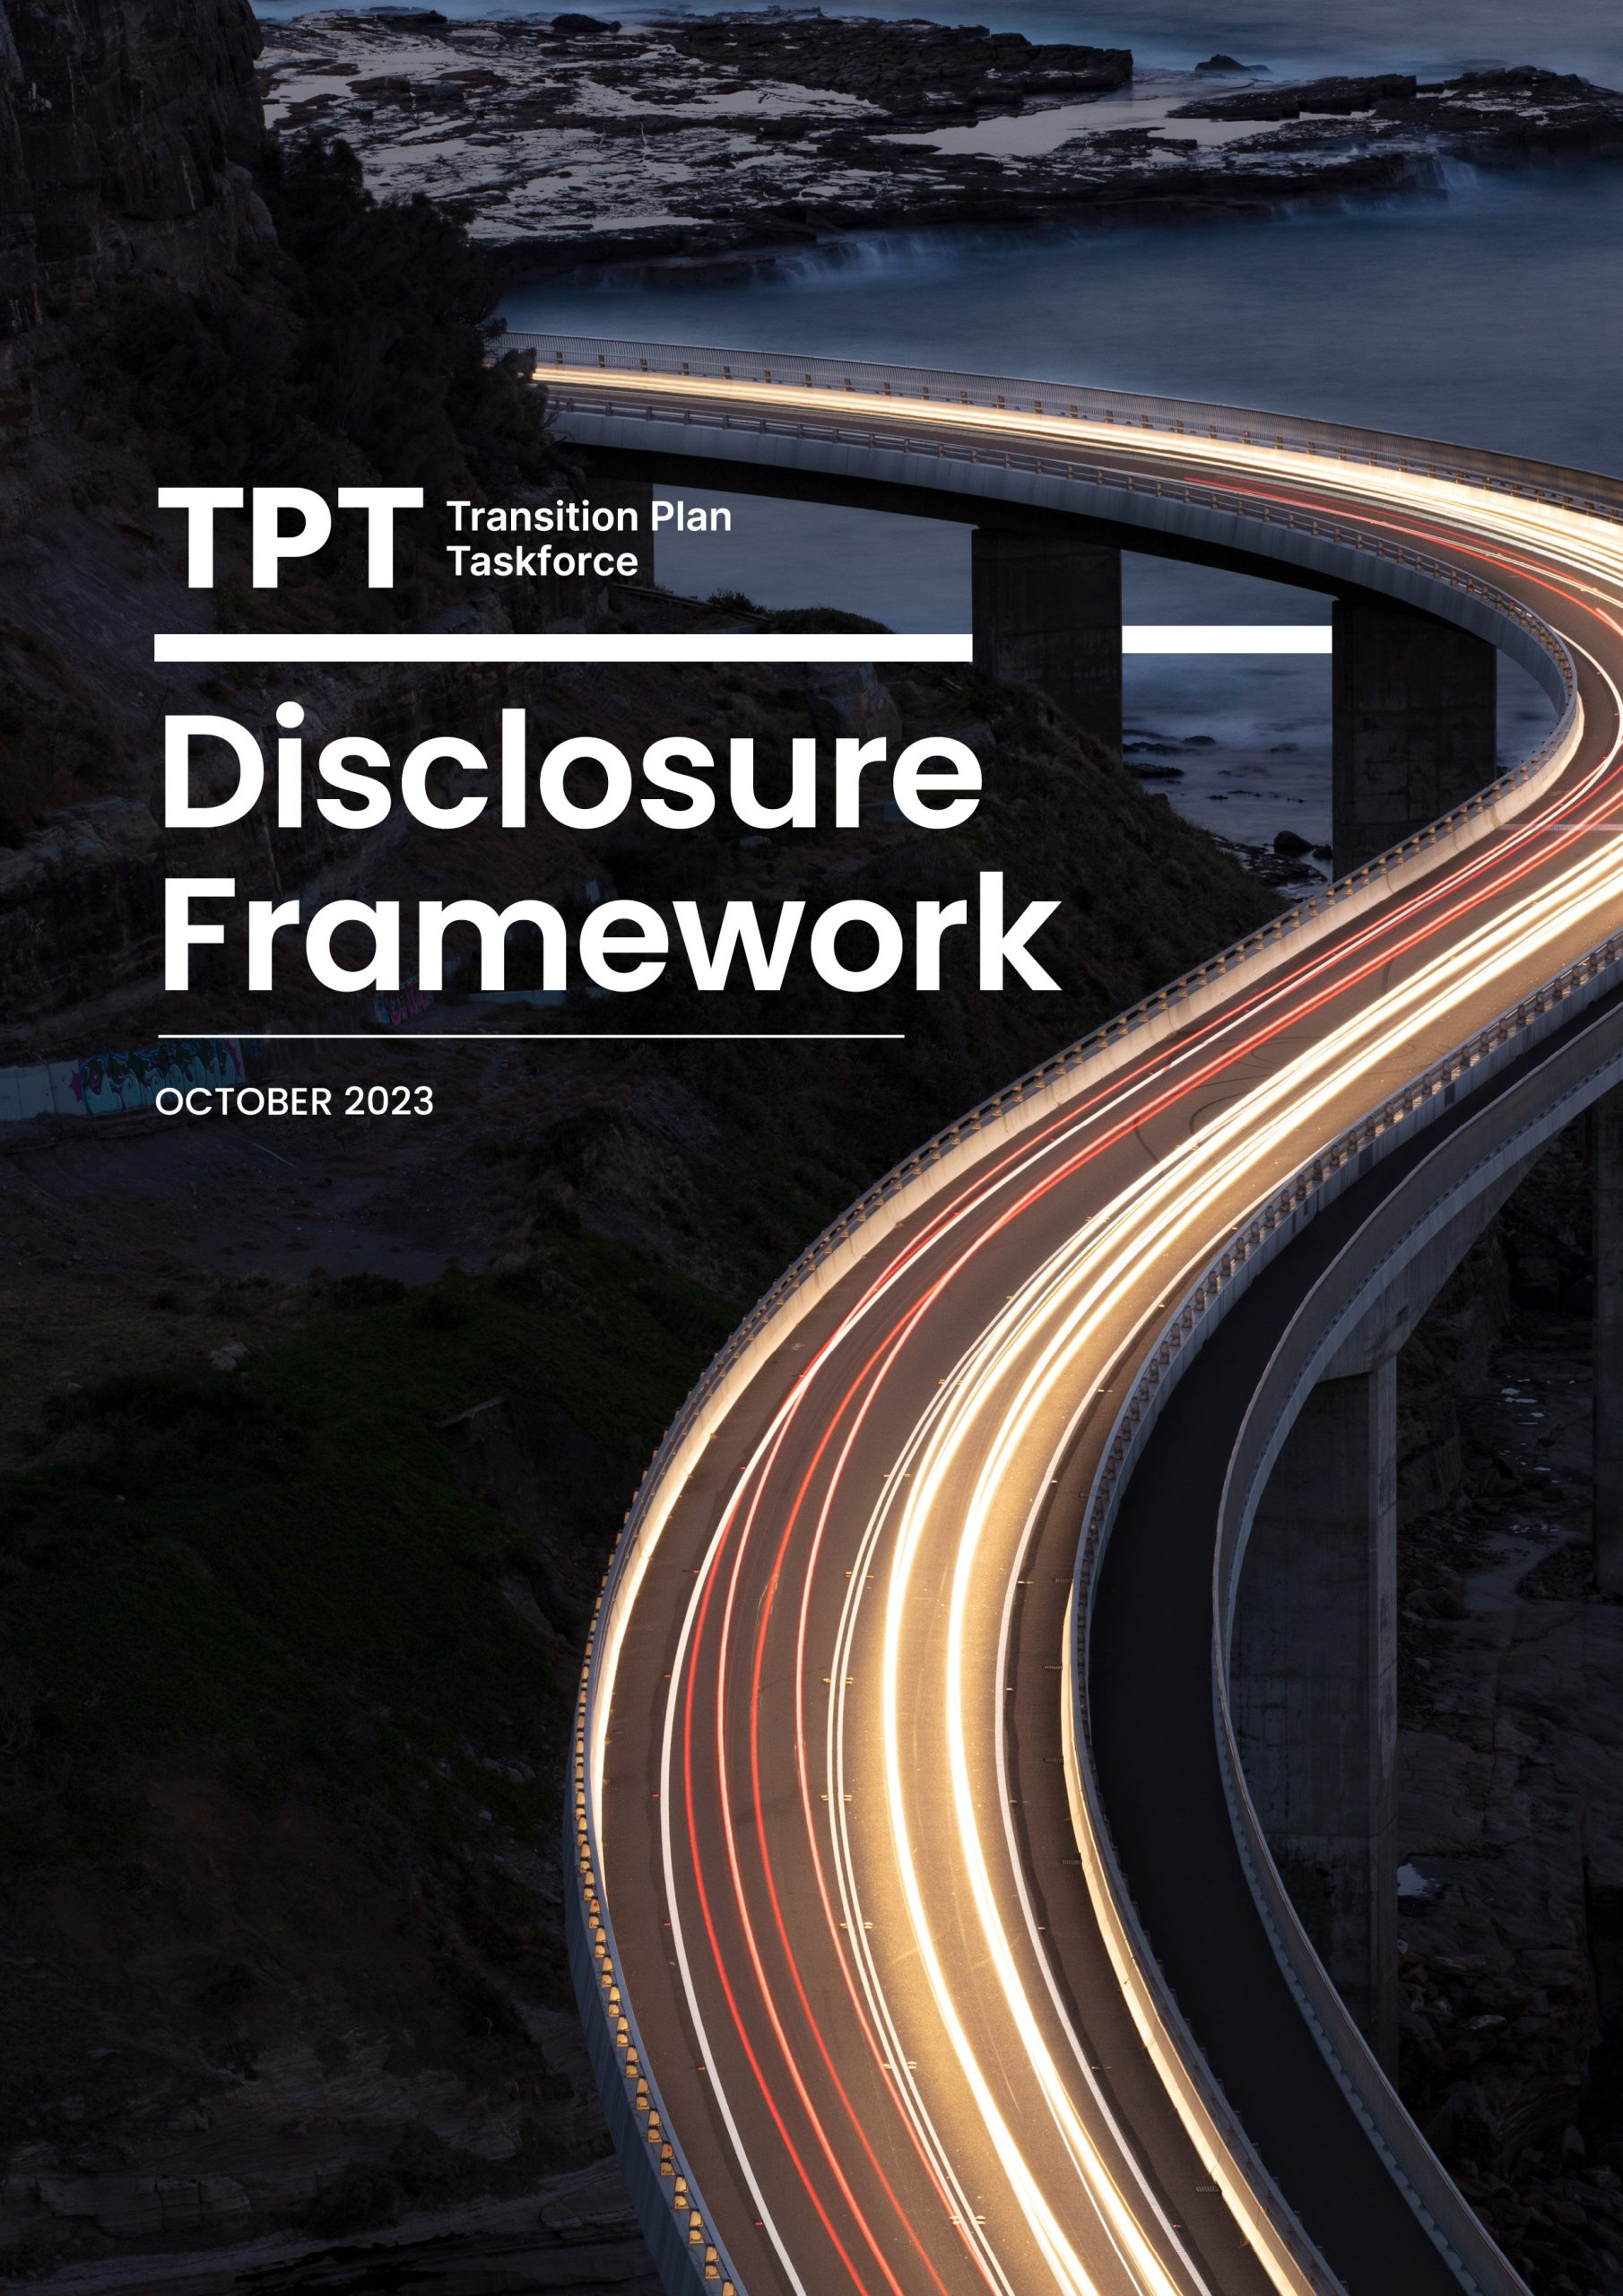 The TPT Disclosure Framework cover